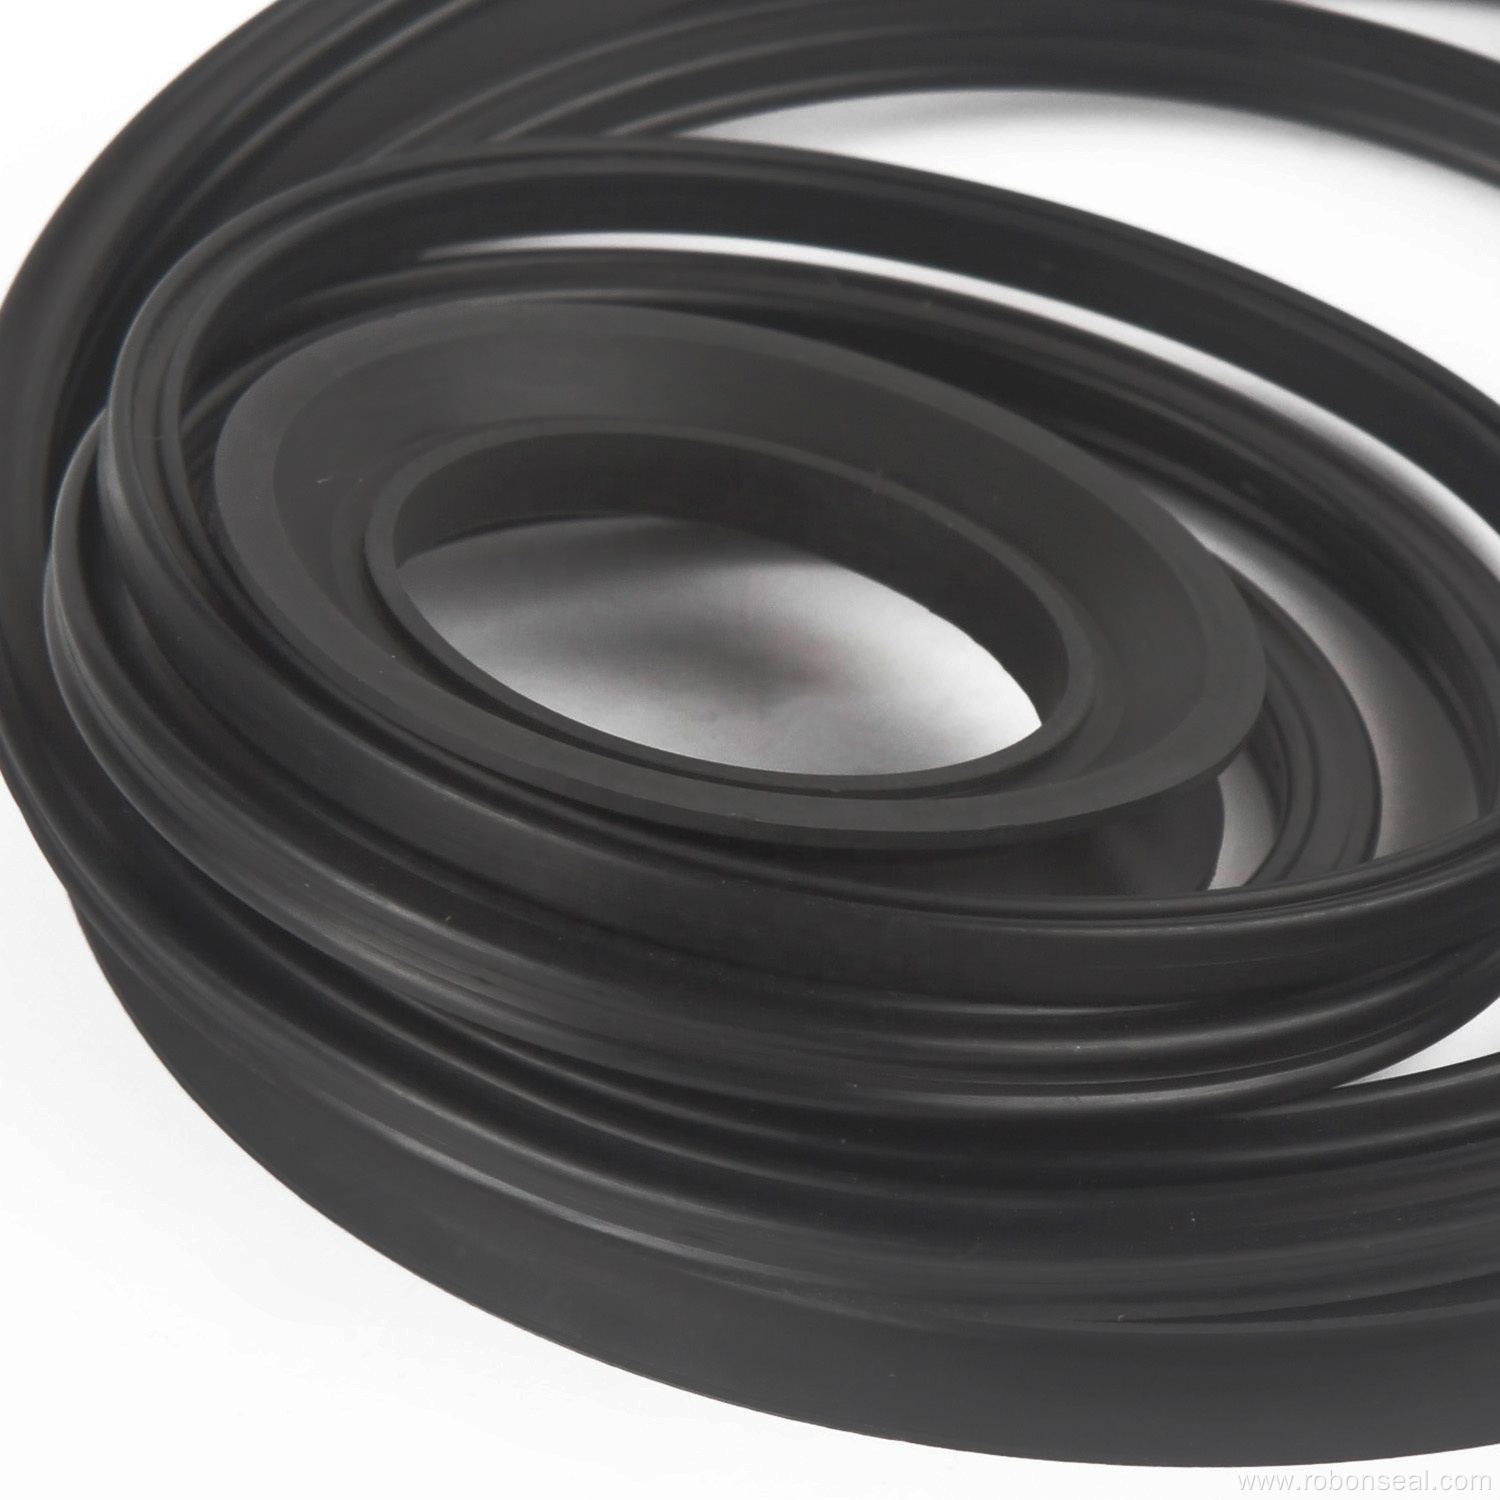 Rubber x shape Nitrile Seal Ring oil seal